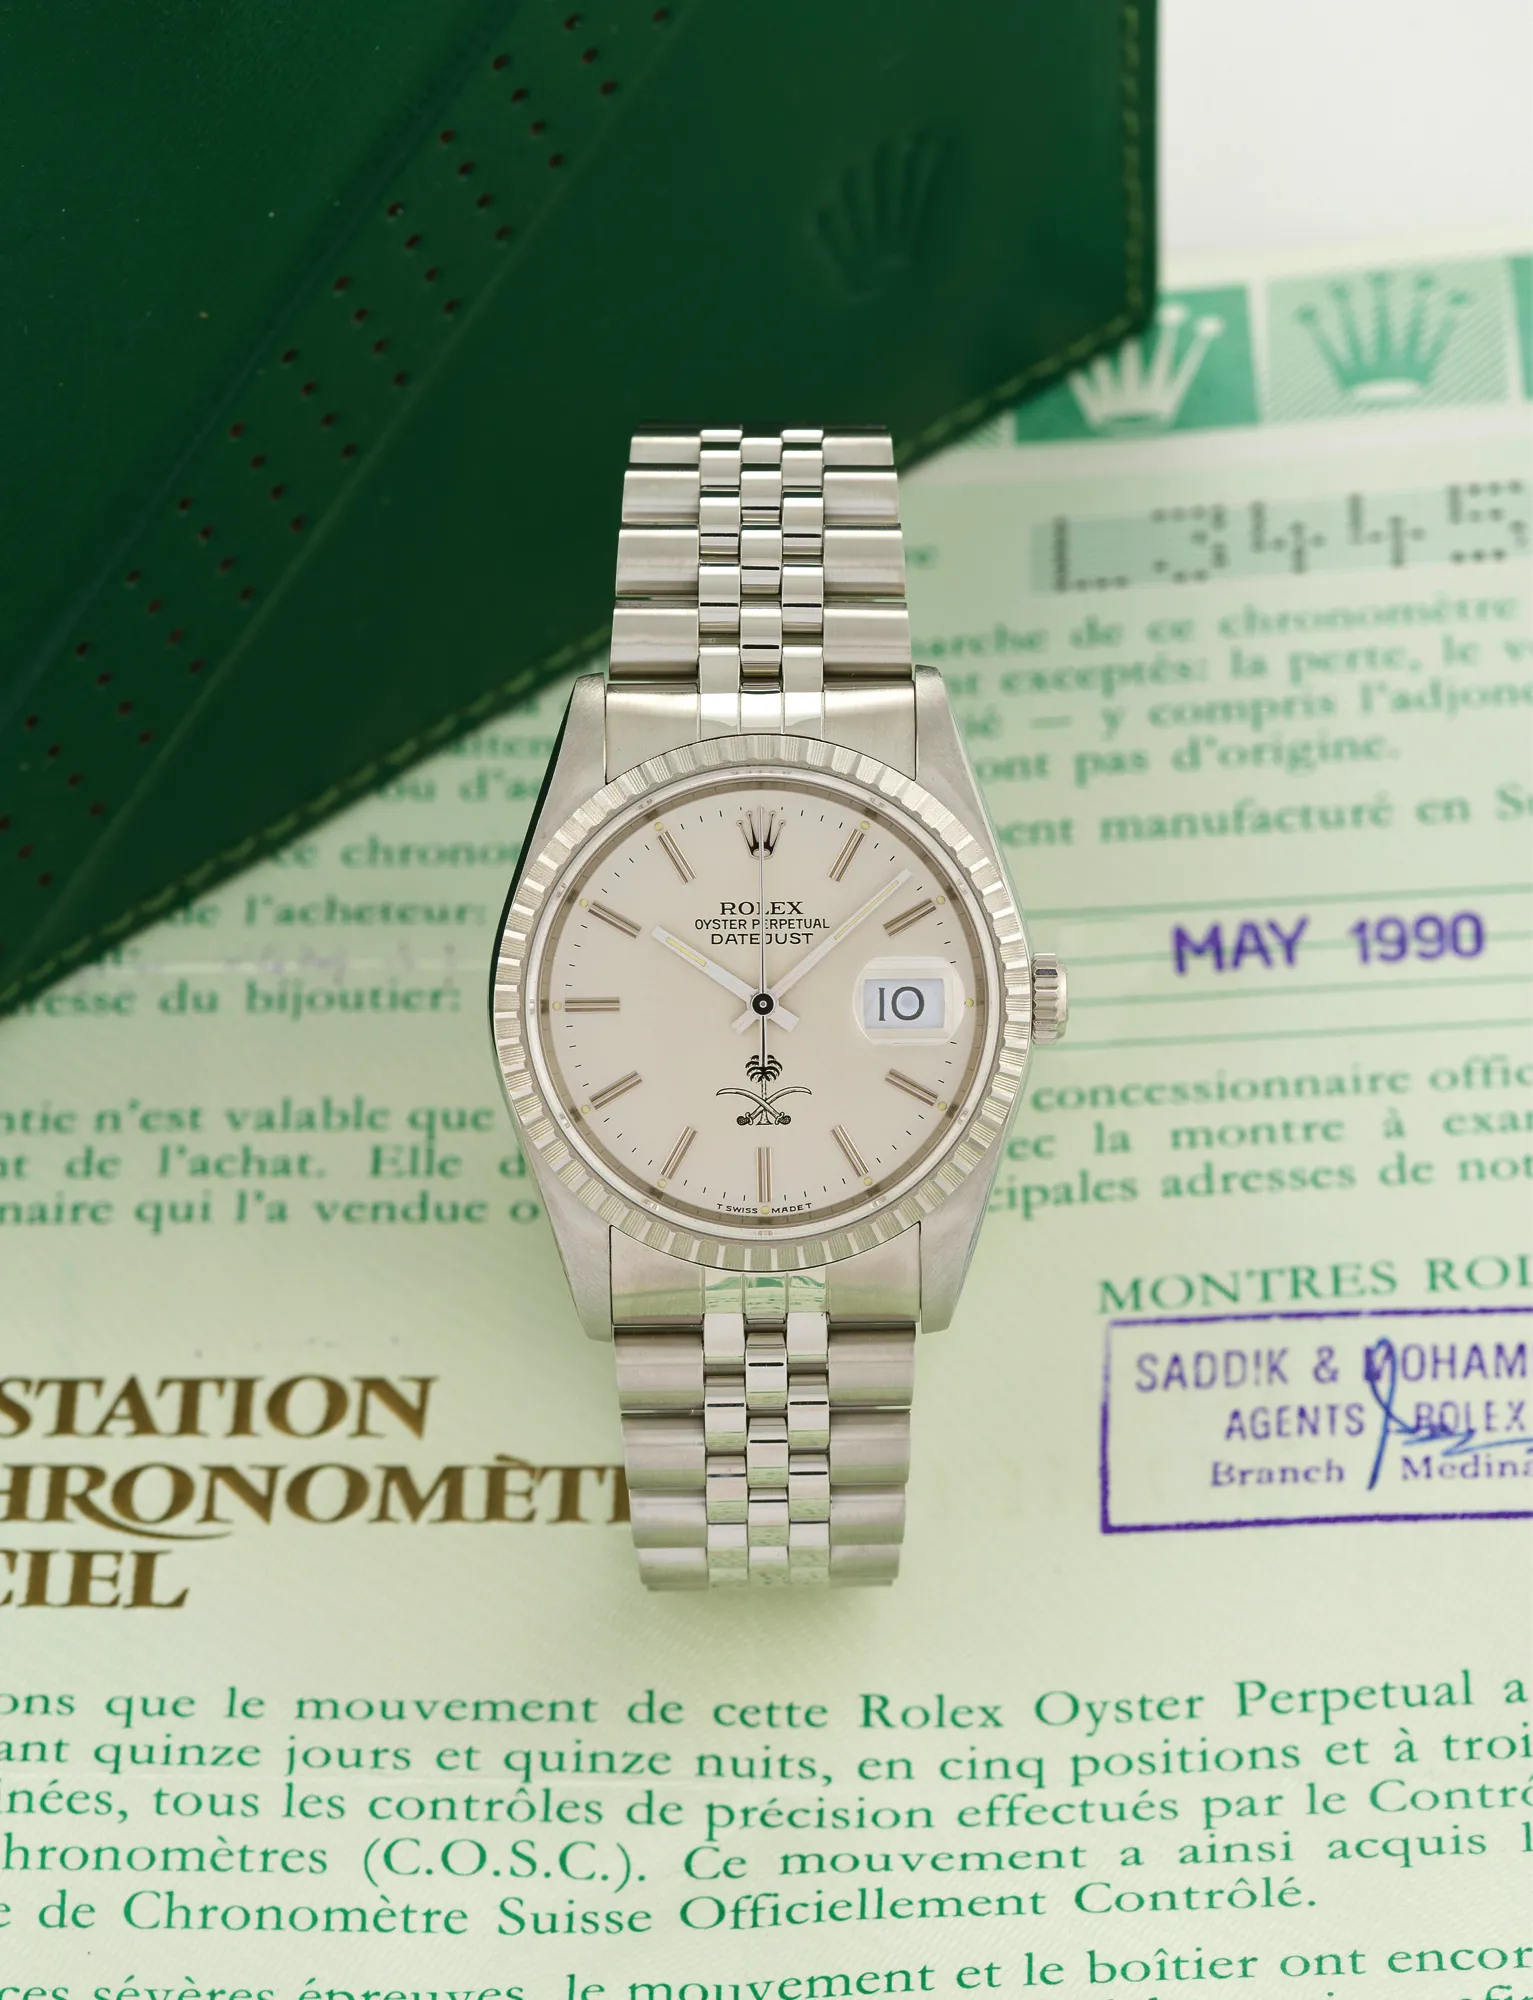 Rolex Datejust 36 16220 36mm Stainless steel Silver